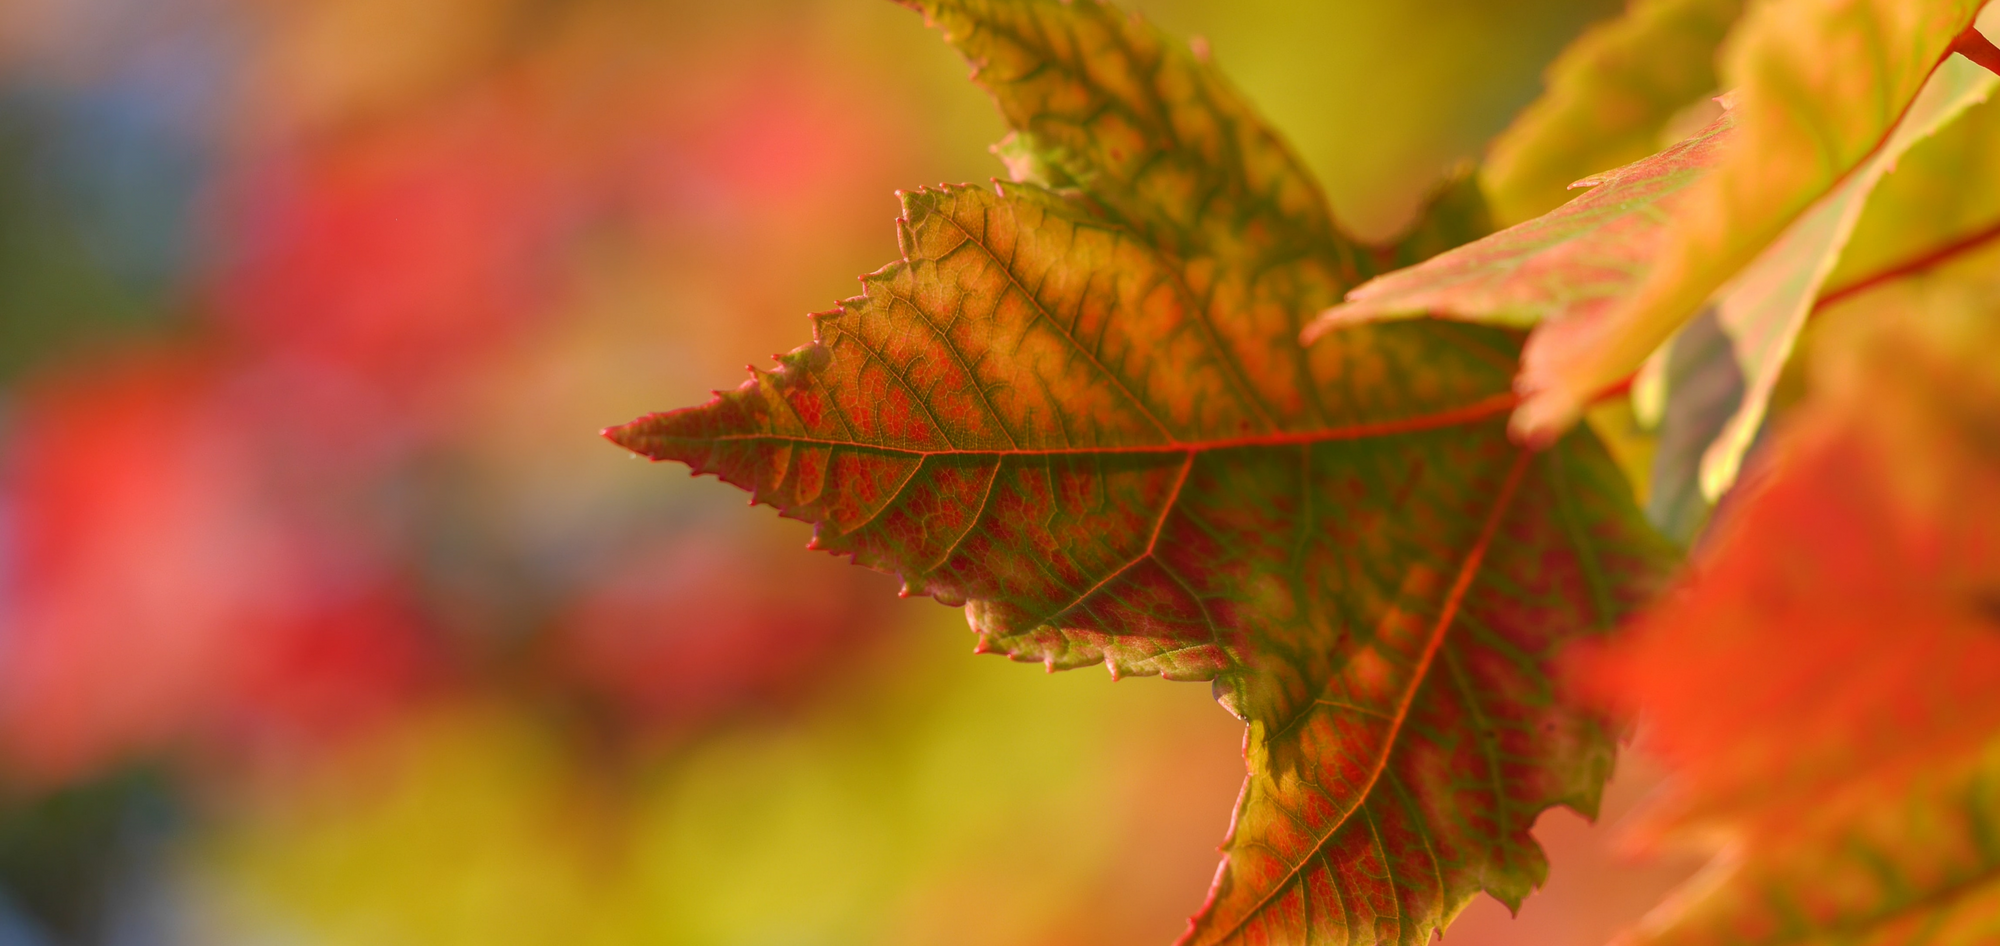 6 tips for autumn photography photo by aaron burden